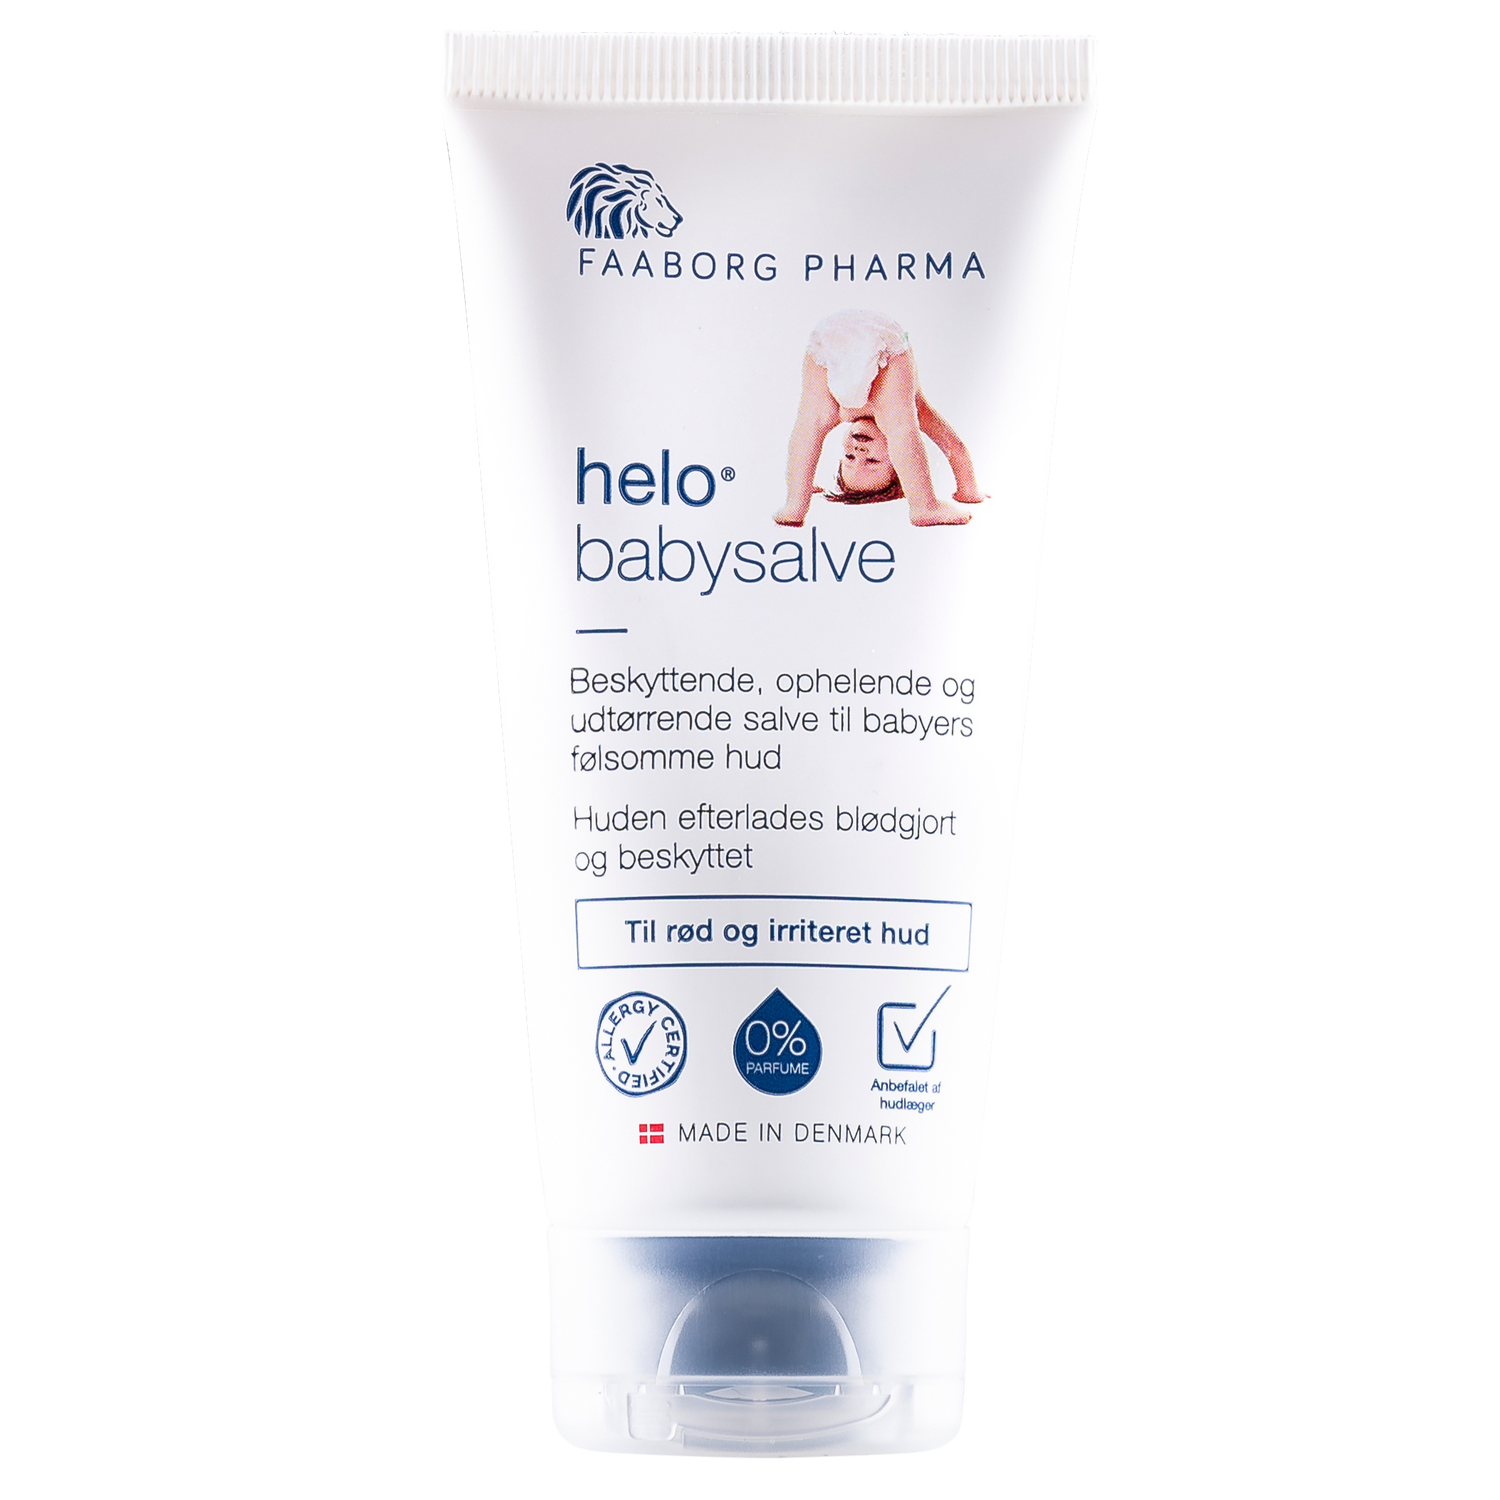 helo® baby ointment